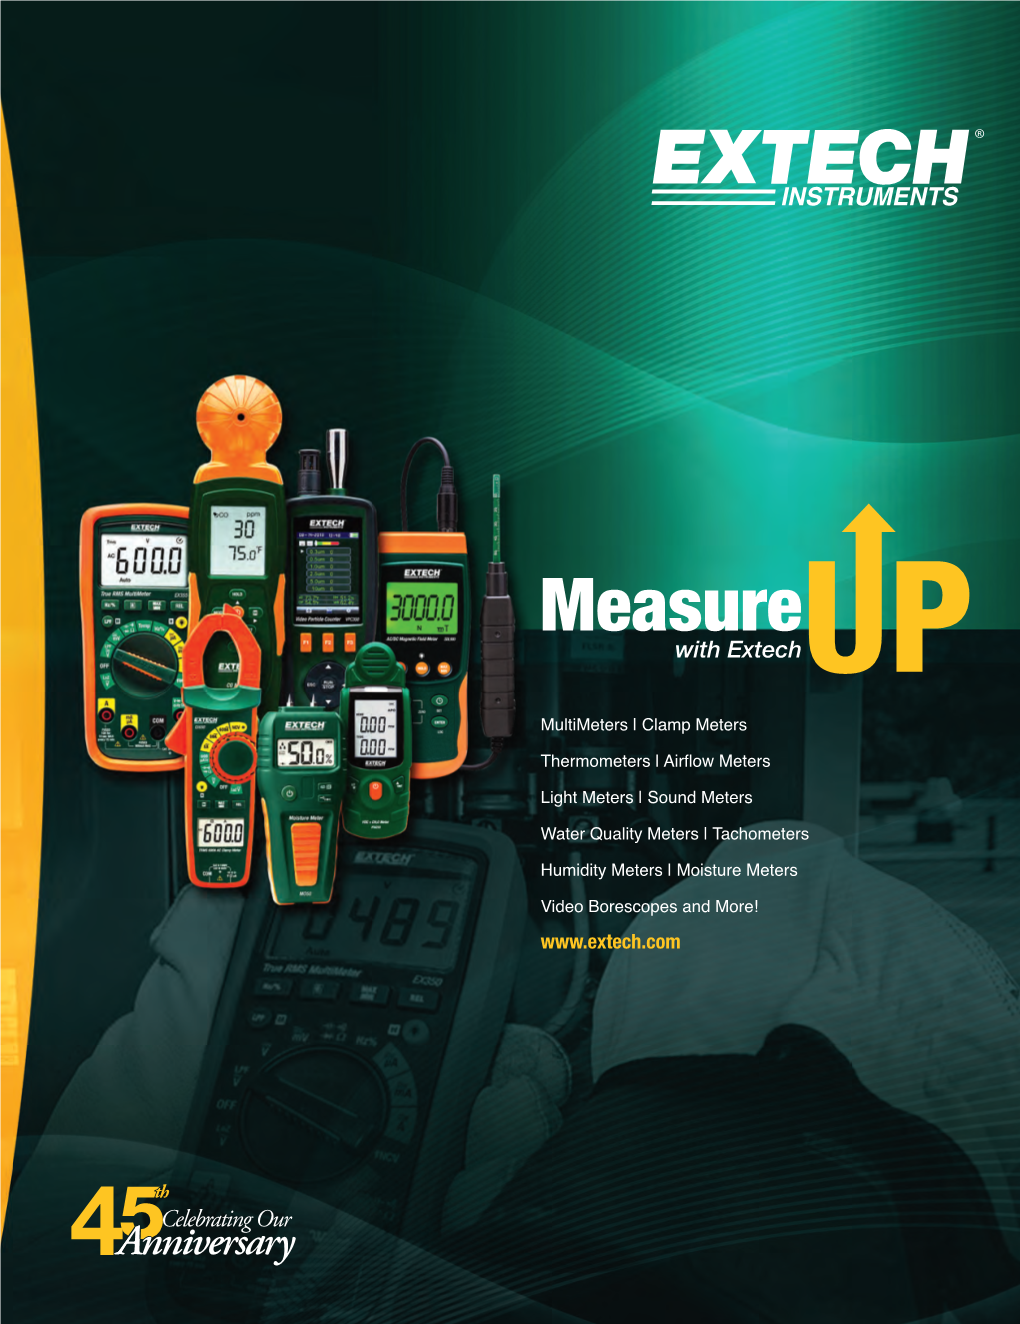 Measure with Extech